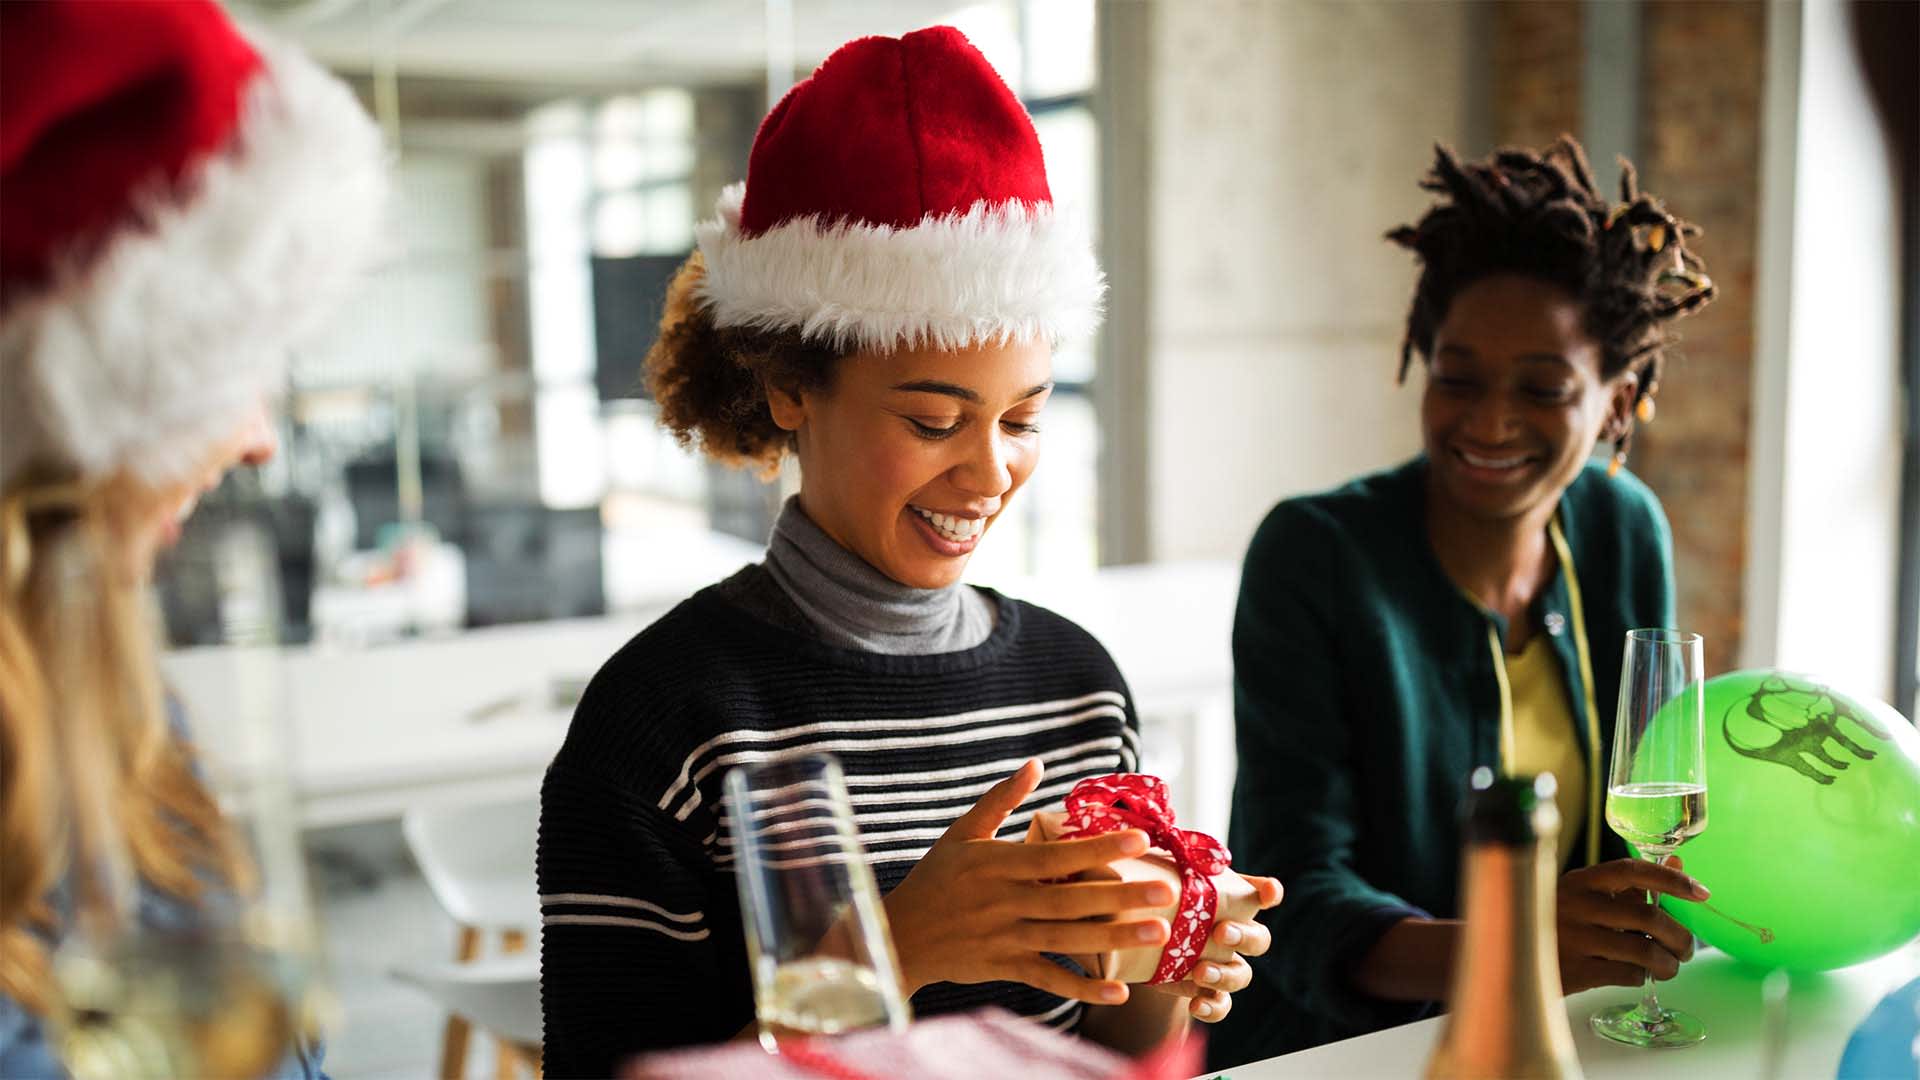 Forget Throwing a Holiday Party. This Is What Your Employees Actually Want This Holiday Season